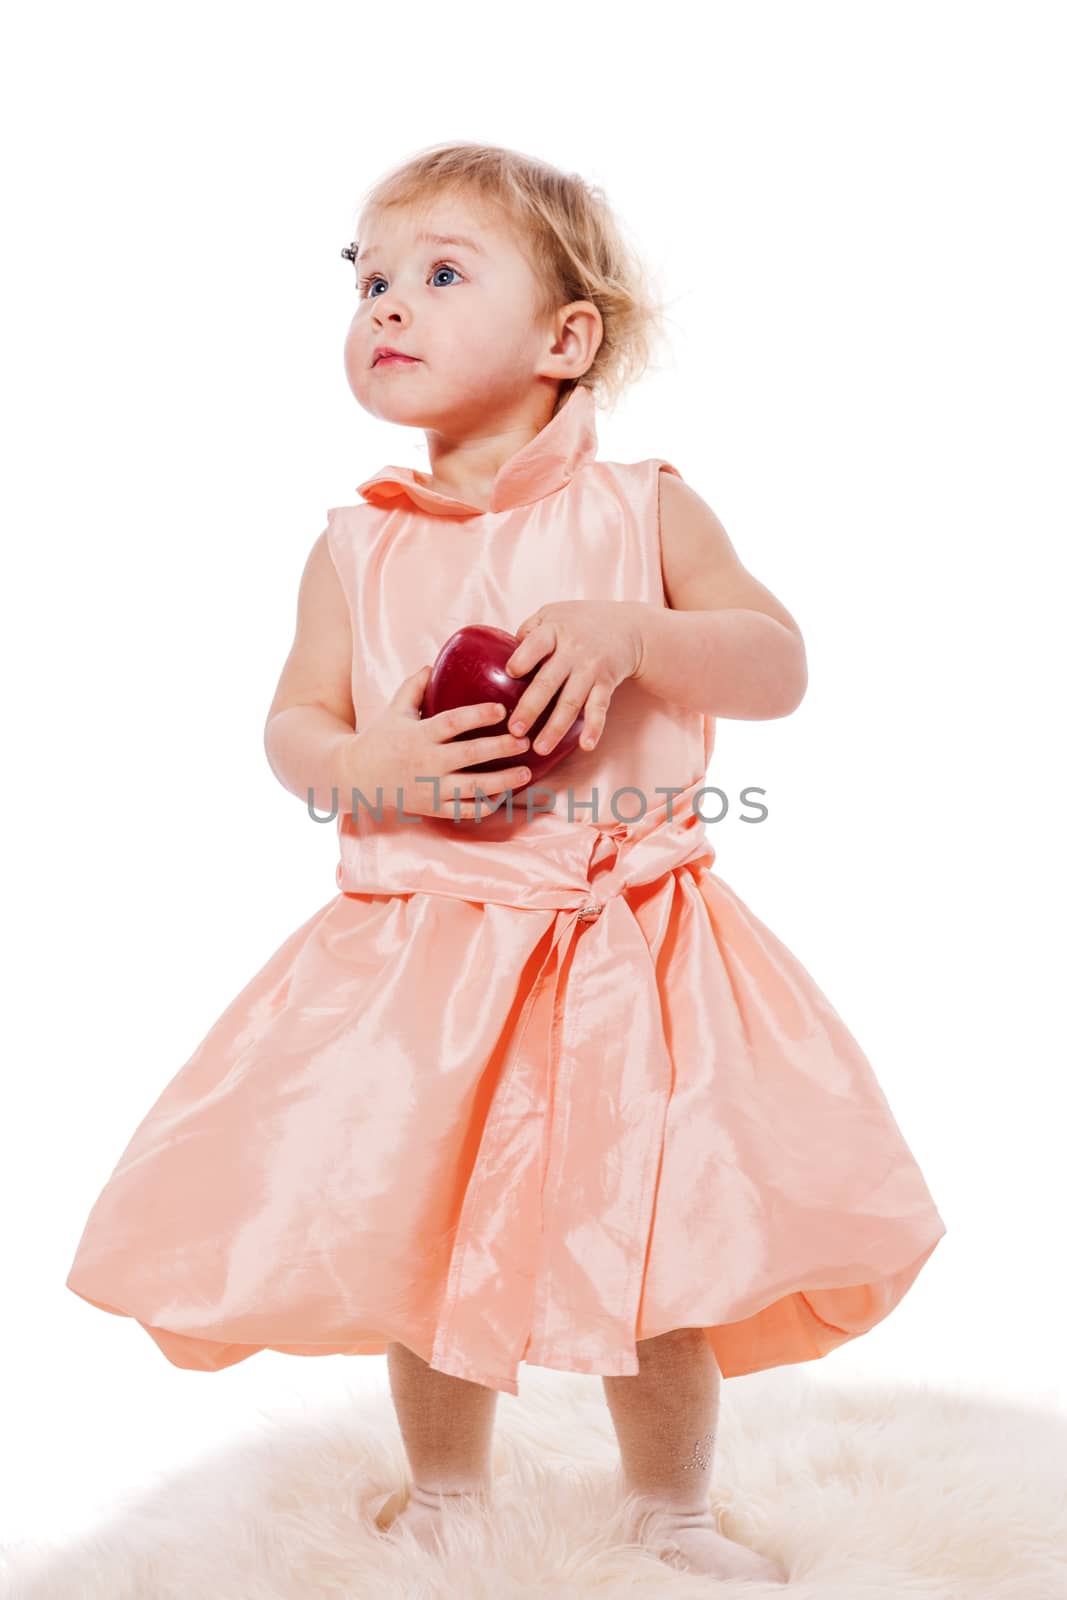 Portrait of cute happy little girl isolated on white